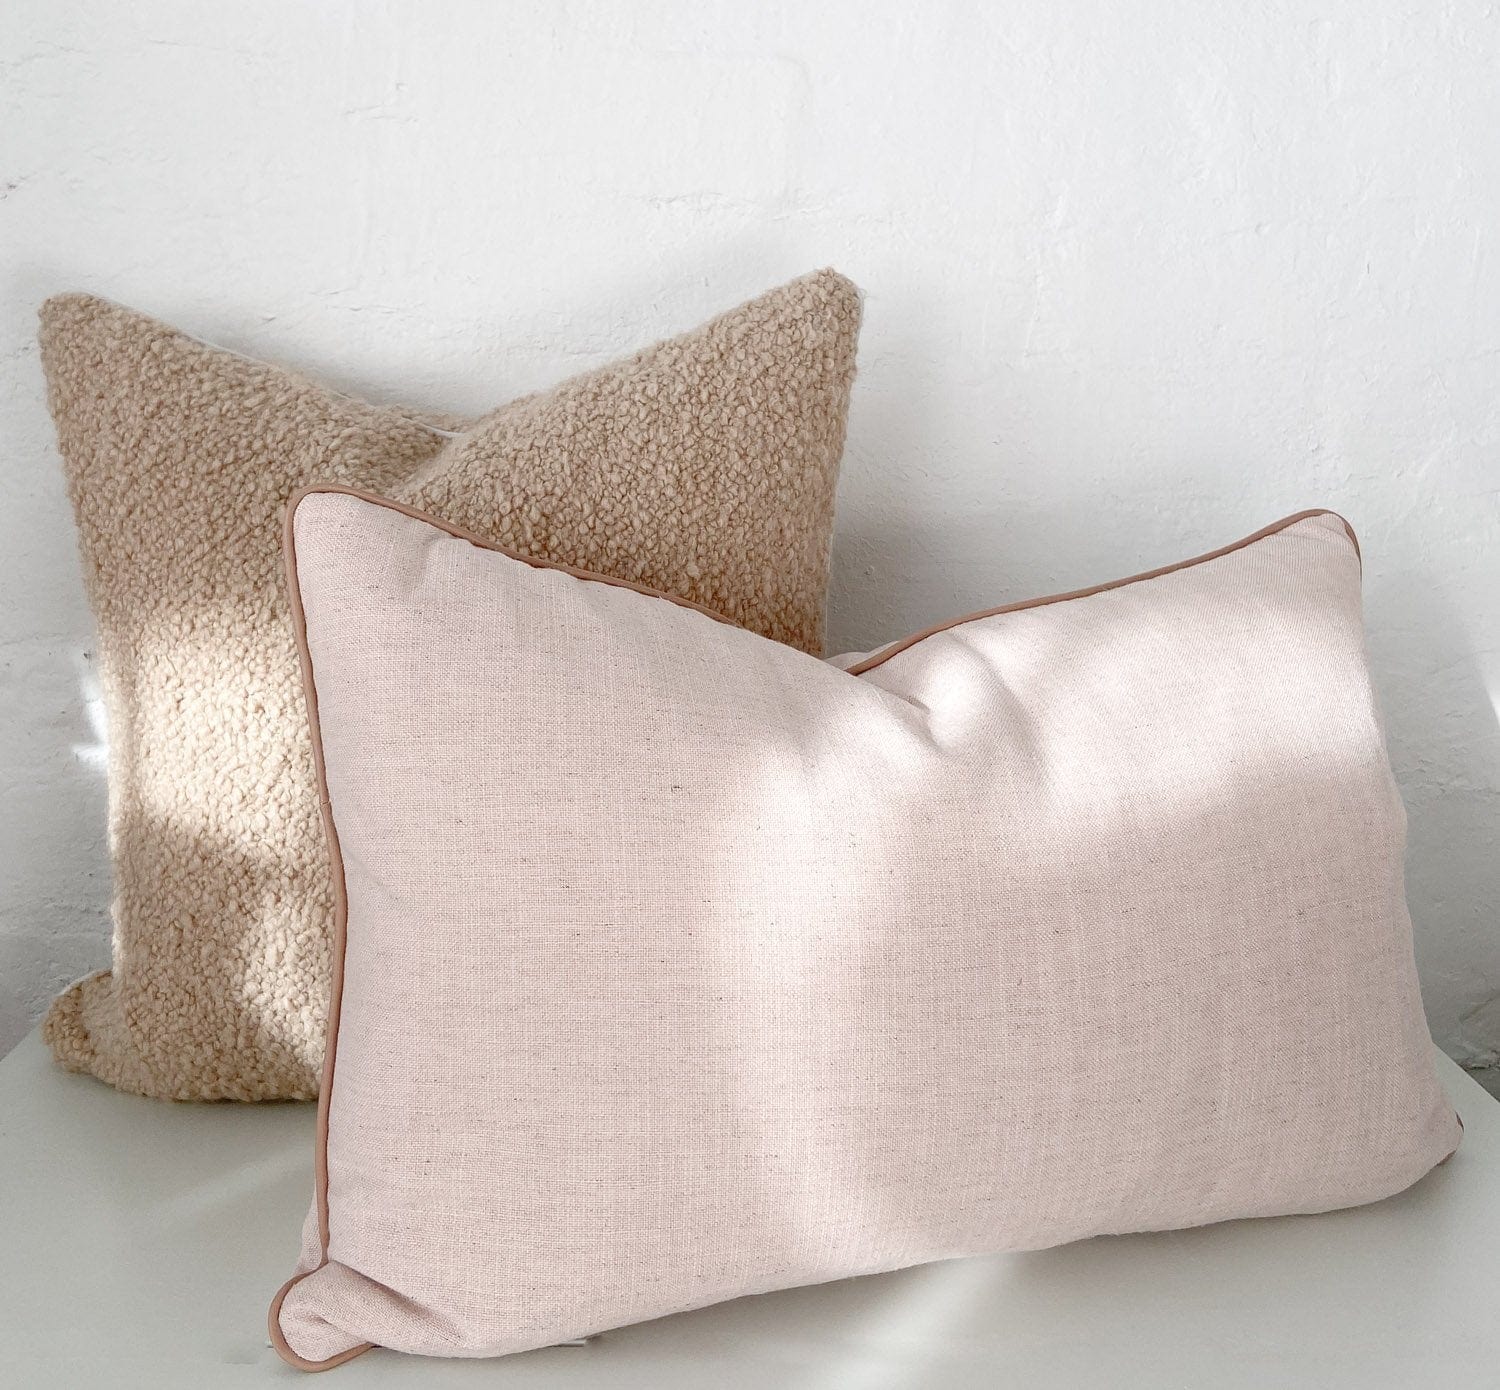 norsu Cushion, Bouclé Buff with White Leather Piping - Norsu Interiors (6582406086844)